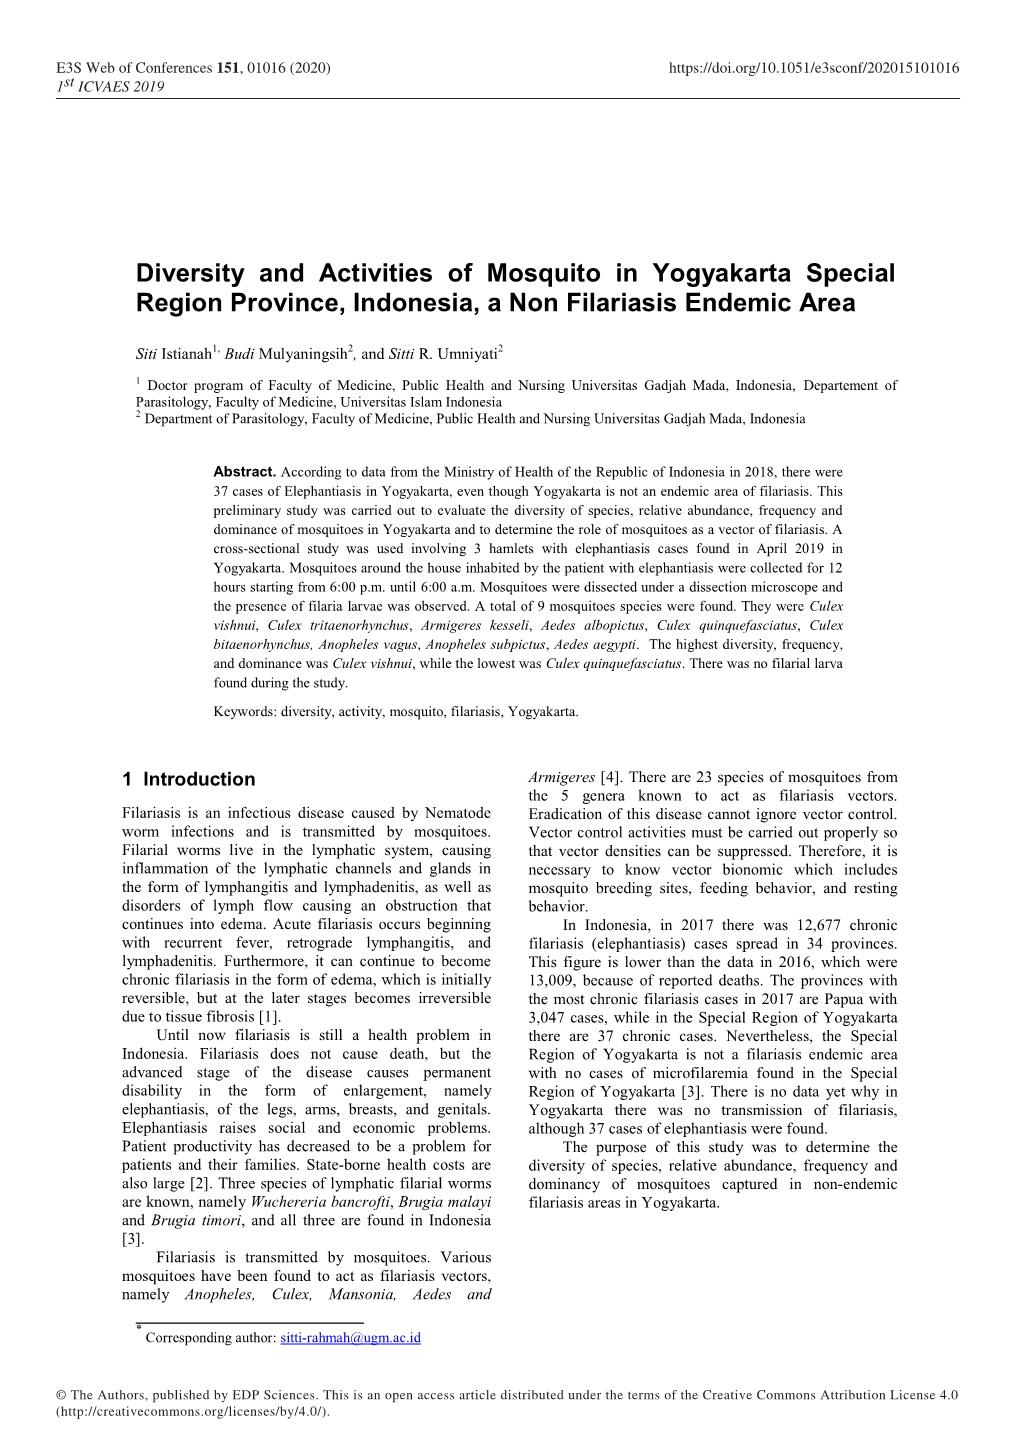 Diversity and Activities of Mosquito in Yogyakarta Special Region Province, Indonesia, a Non Filariasis Endemic Area